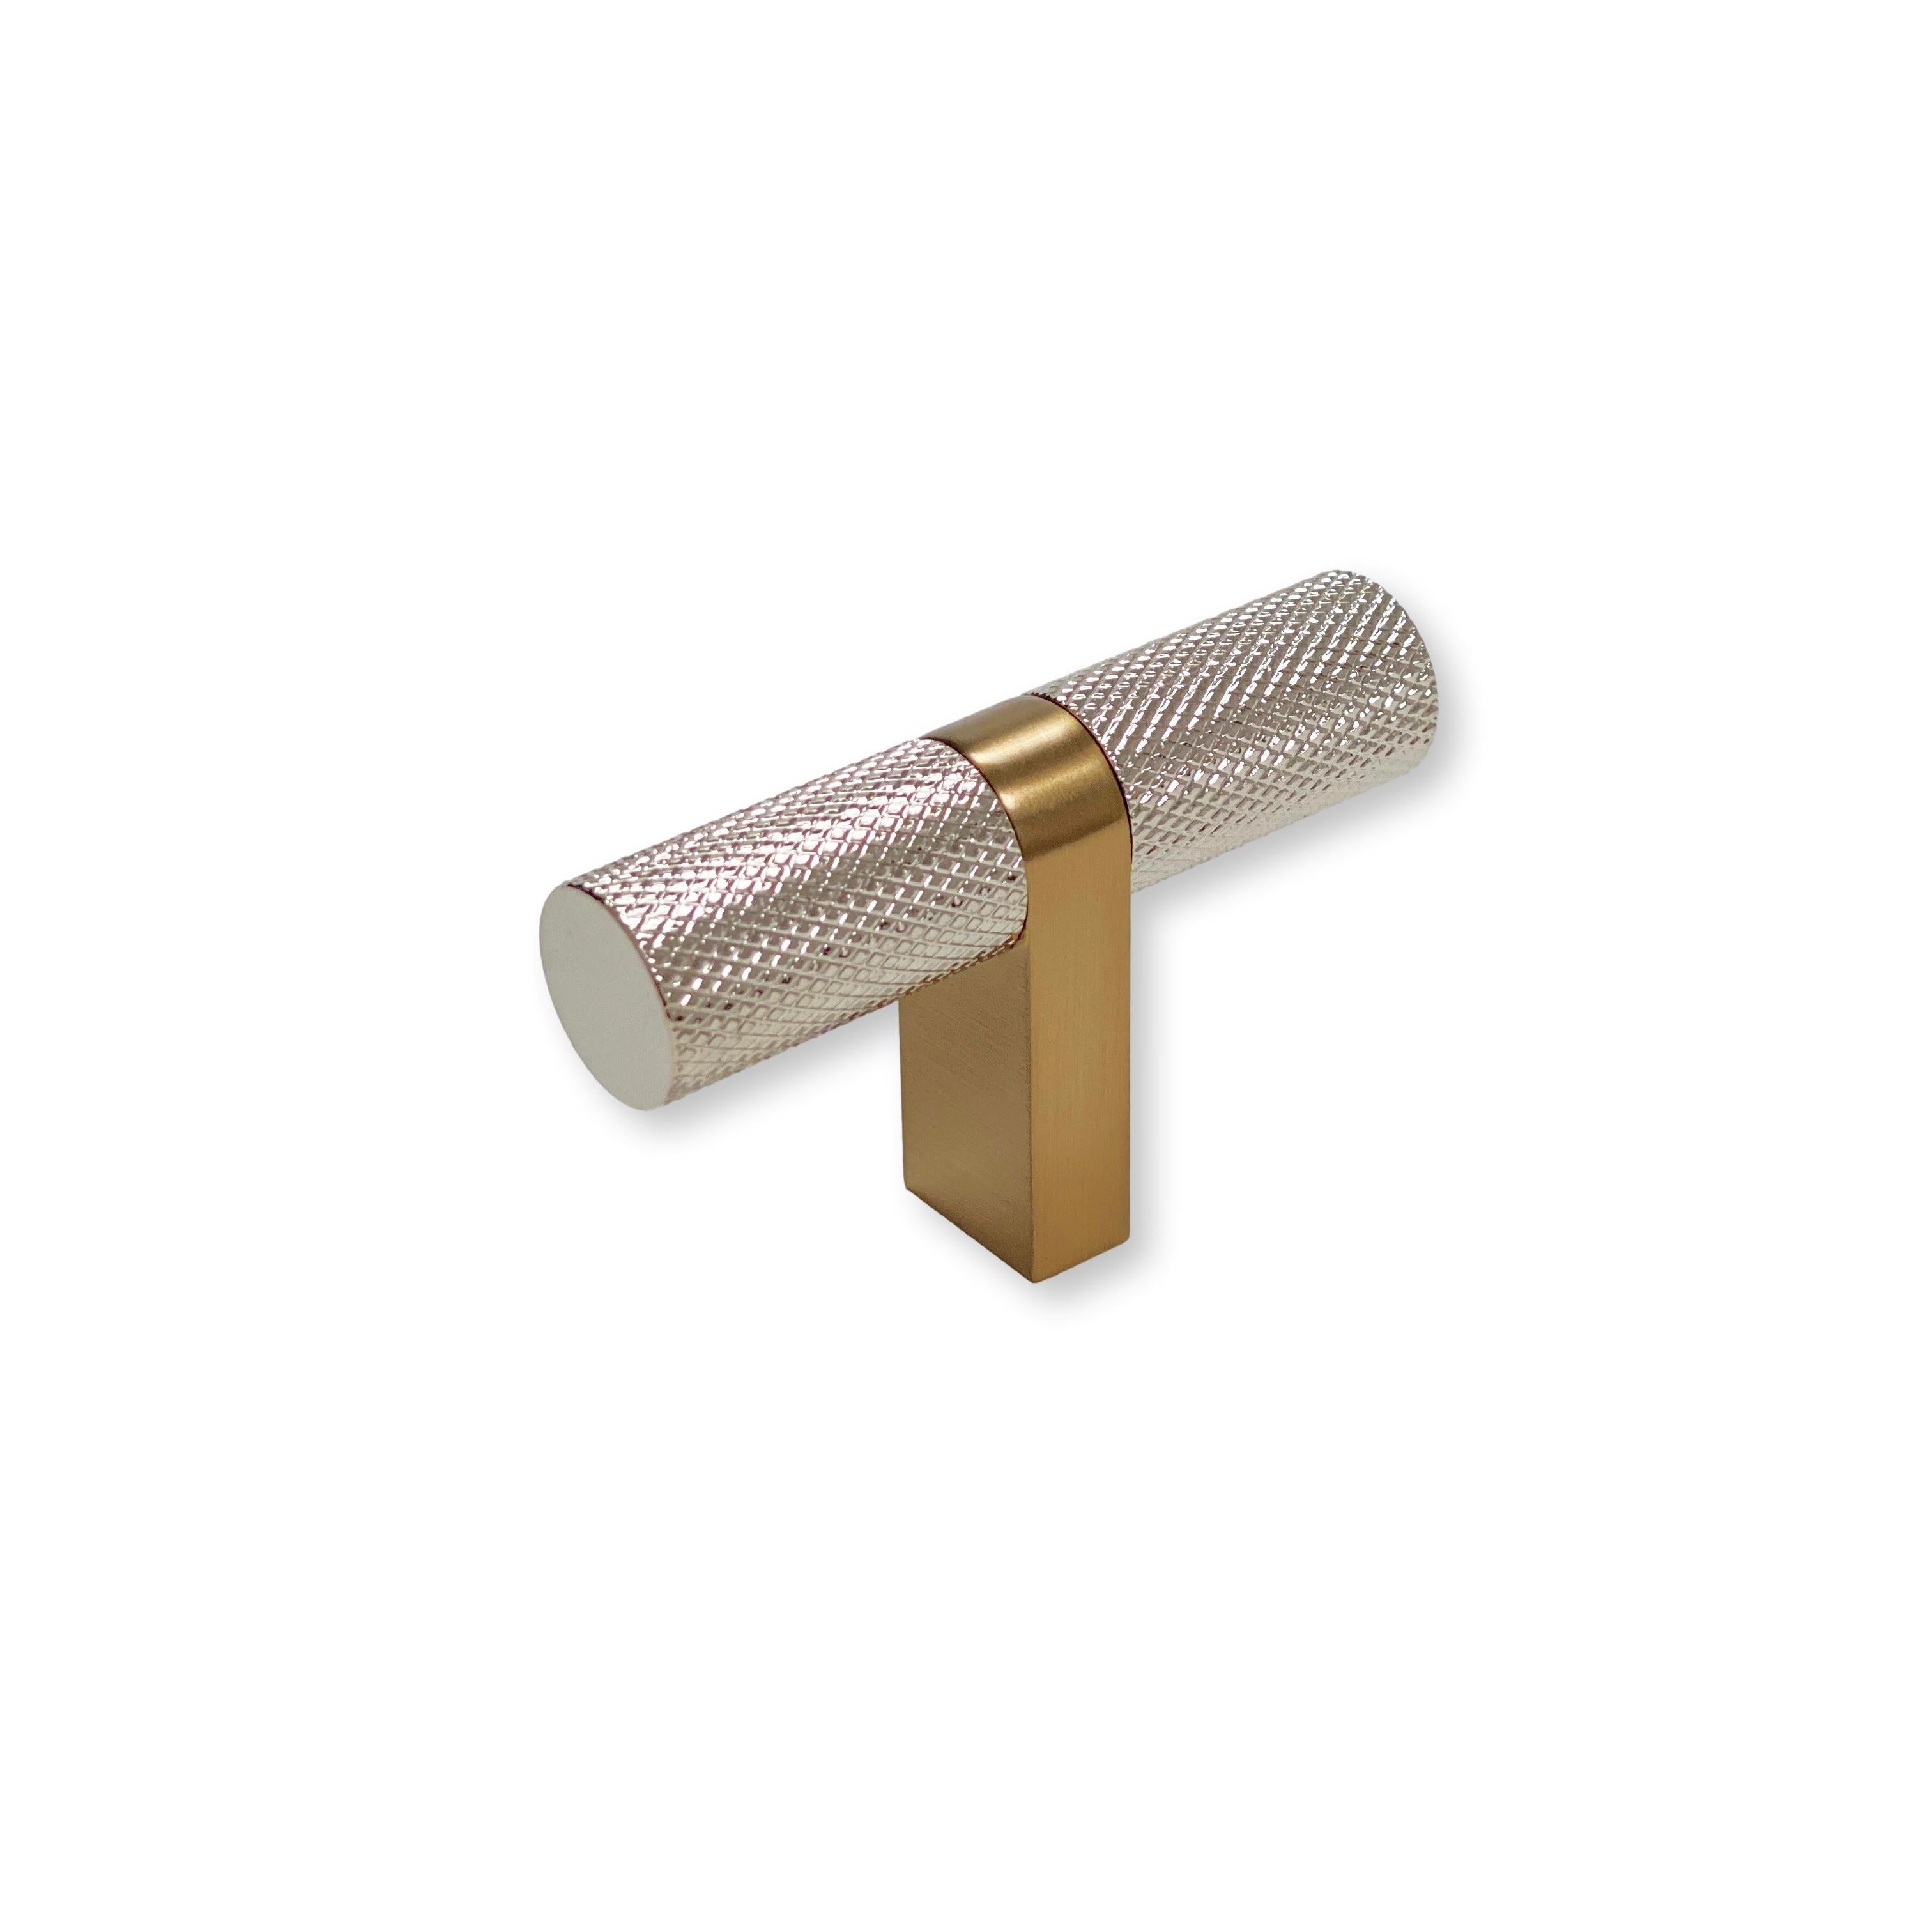 Knurled Select T-Bar Champagne Bronze and Polished Nickel Knobs and Pulls - Industry Hardware